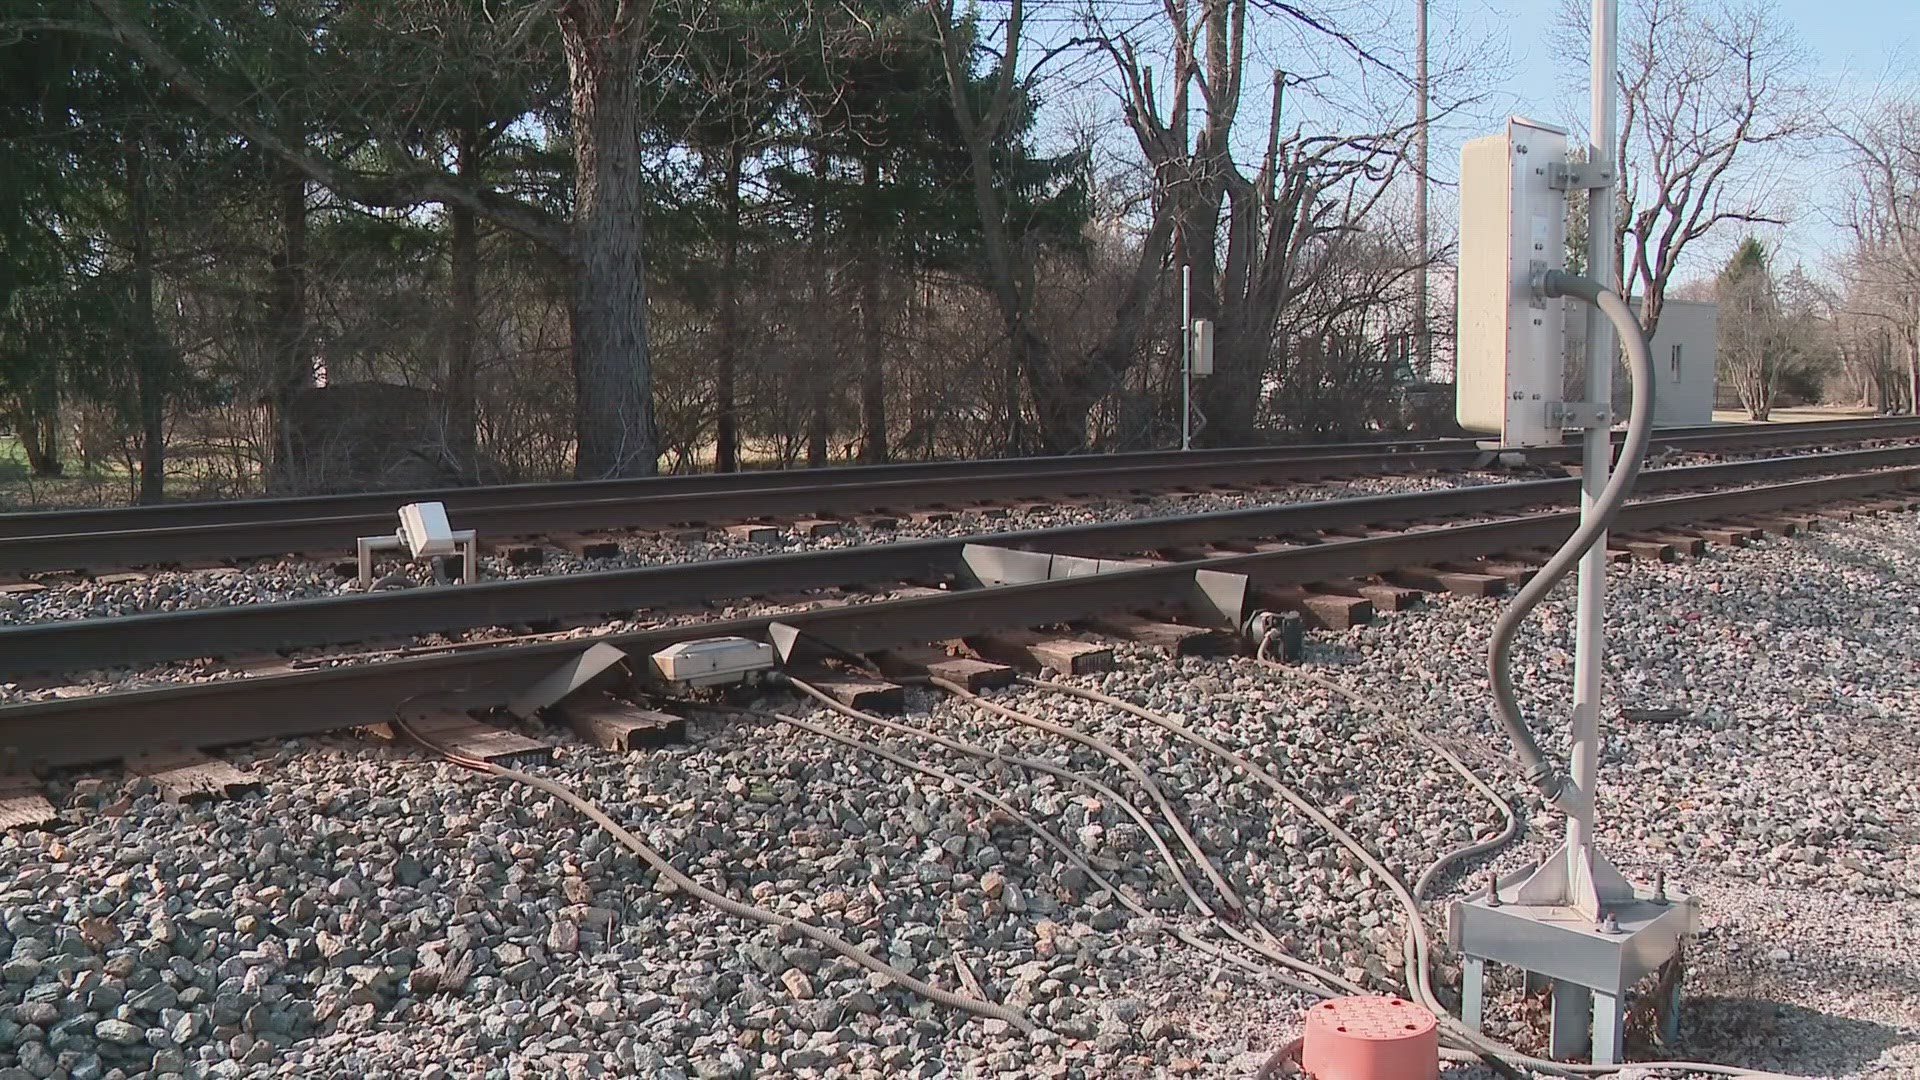 The announcement comes one day before Norfolk Southern’s CEO Alan Shaw is expected to testify before Congress on his rail company’s response to the derailment.